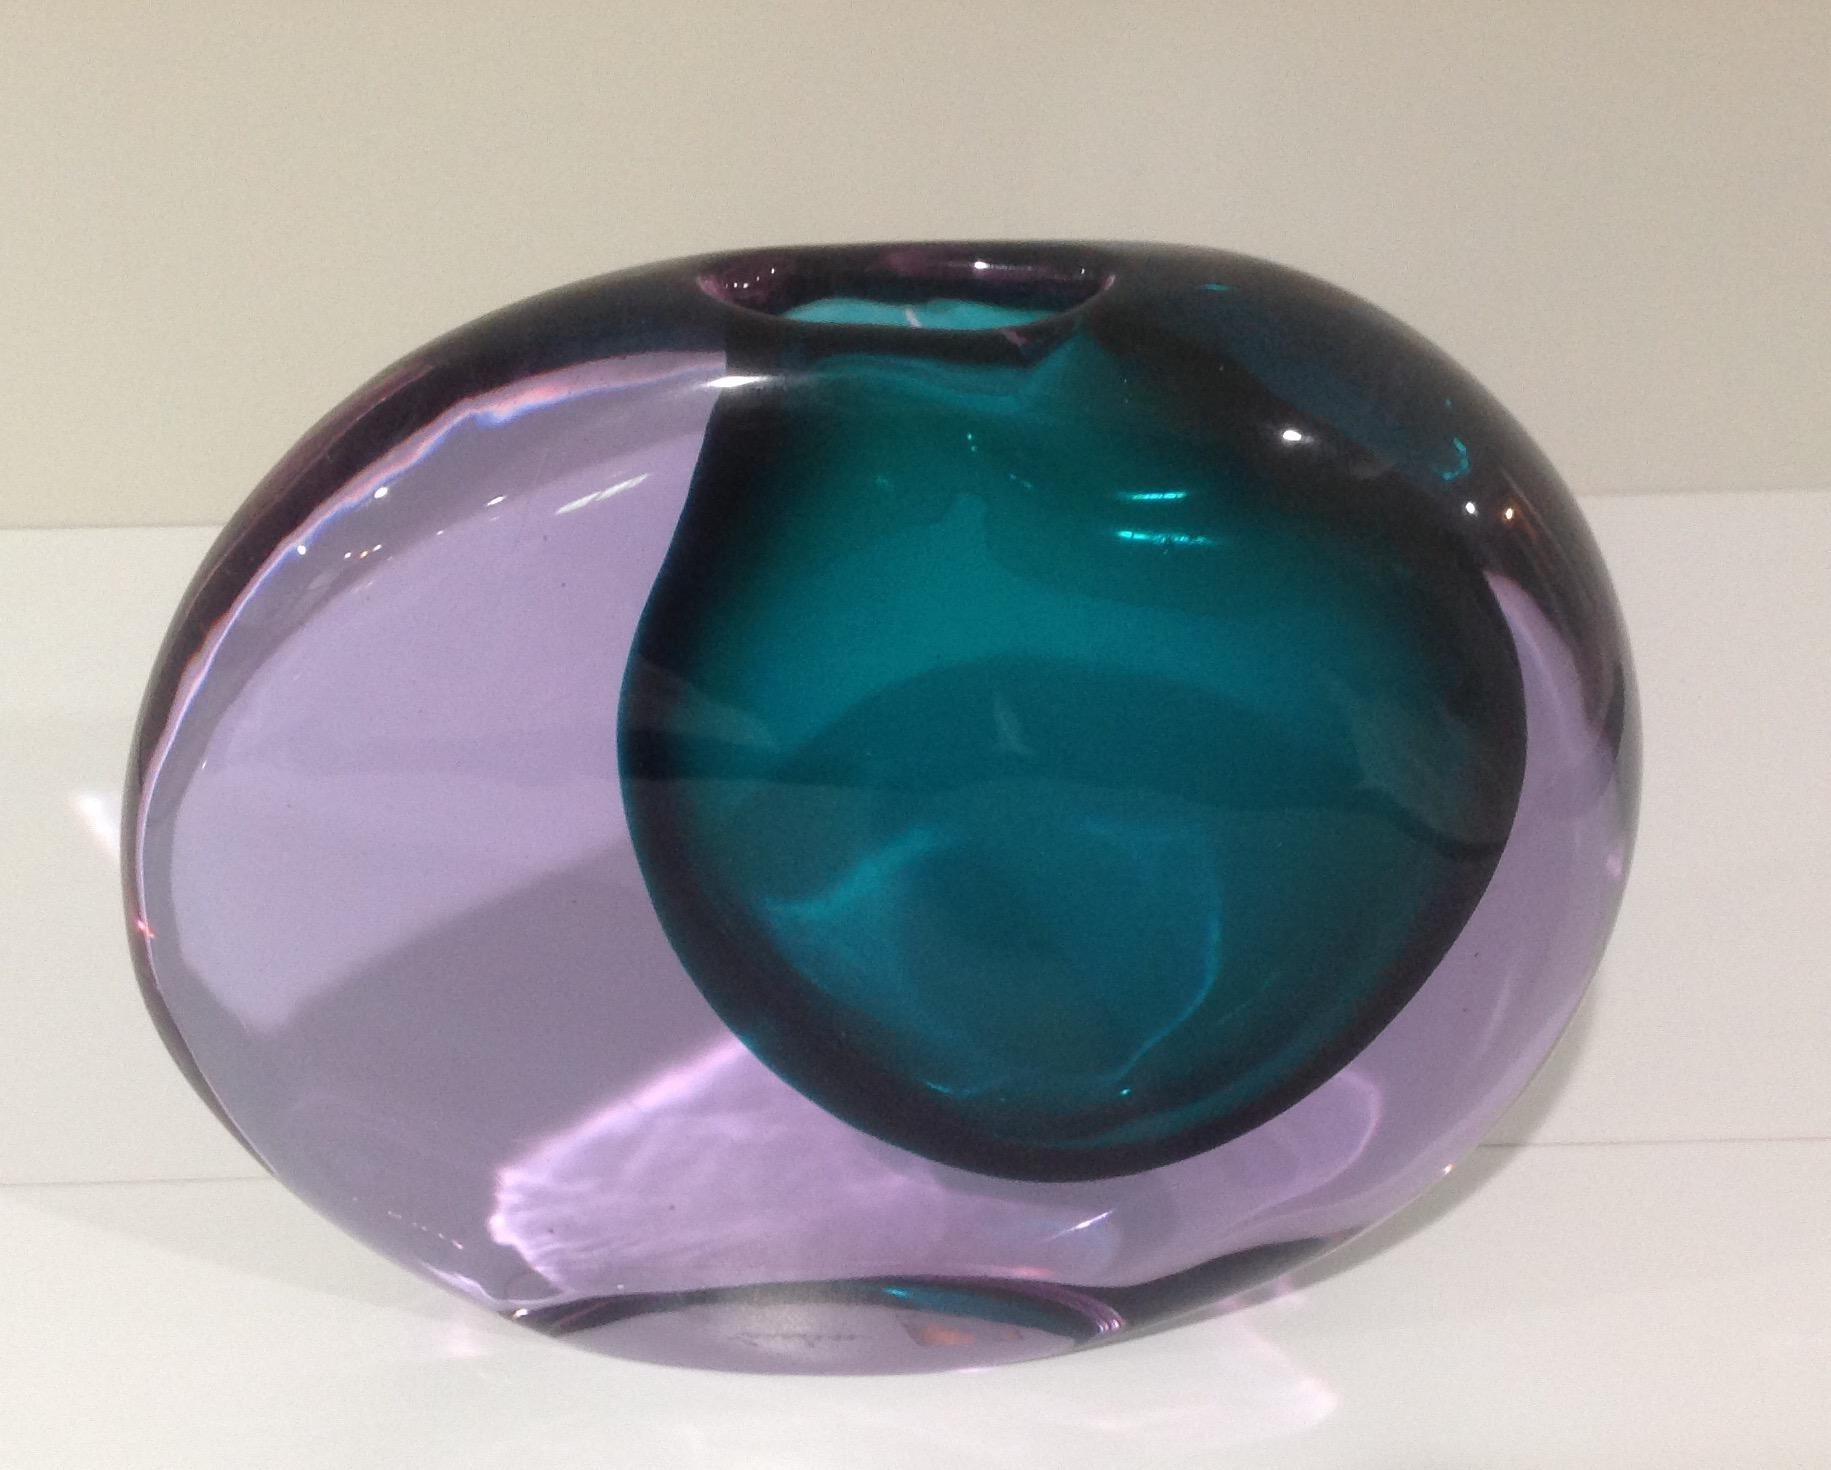 Amazing Momento vase in Alexandrite glass, and blue. Designed by Antonio Daros for Cenedese.